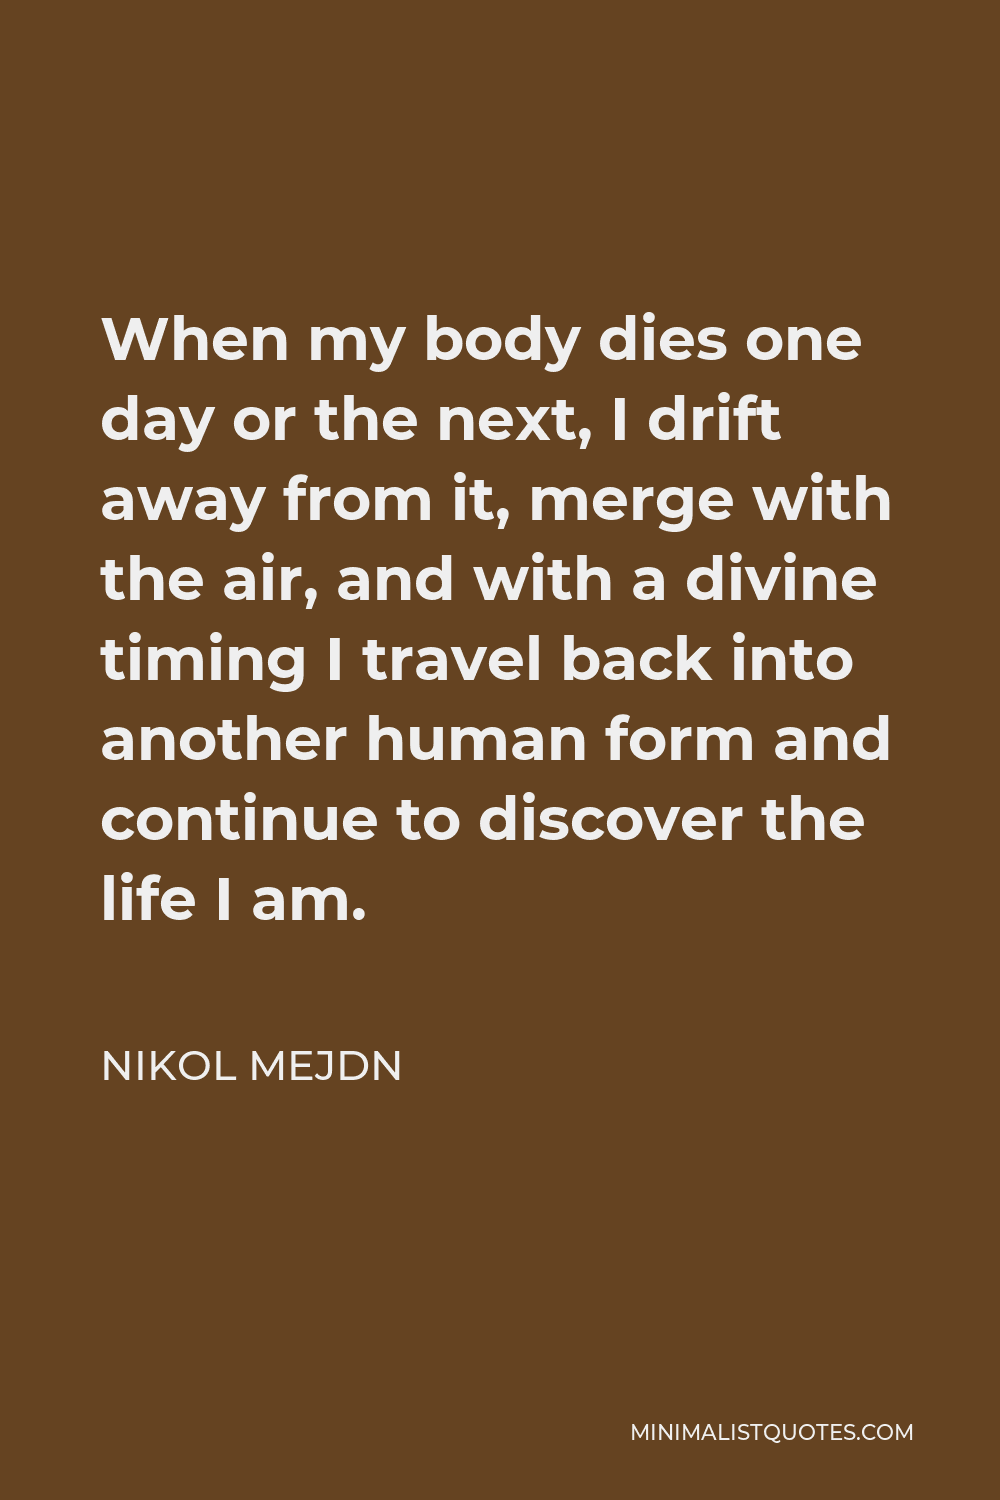 Nikol Mejdn Quote - When my body dies one day or the next, I drift away from it, merge with the air, and with a divine timing I travel back into another human form and continue to discover the life I am.